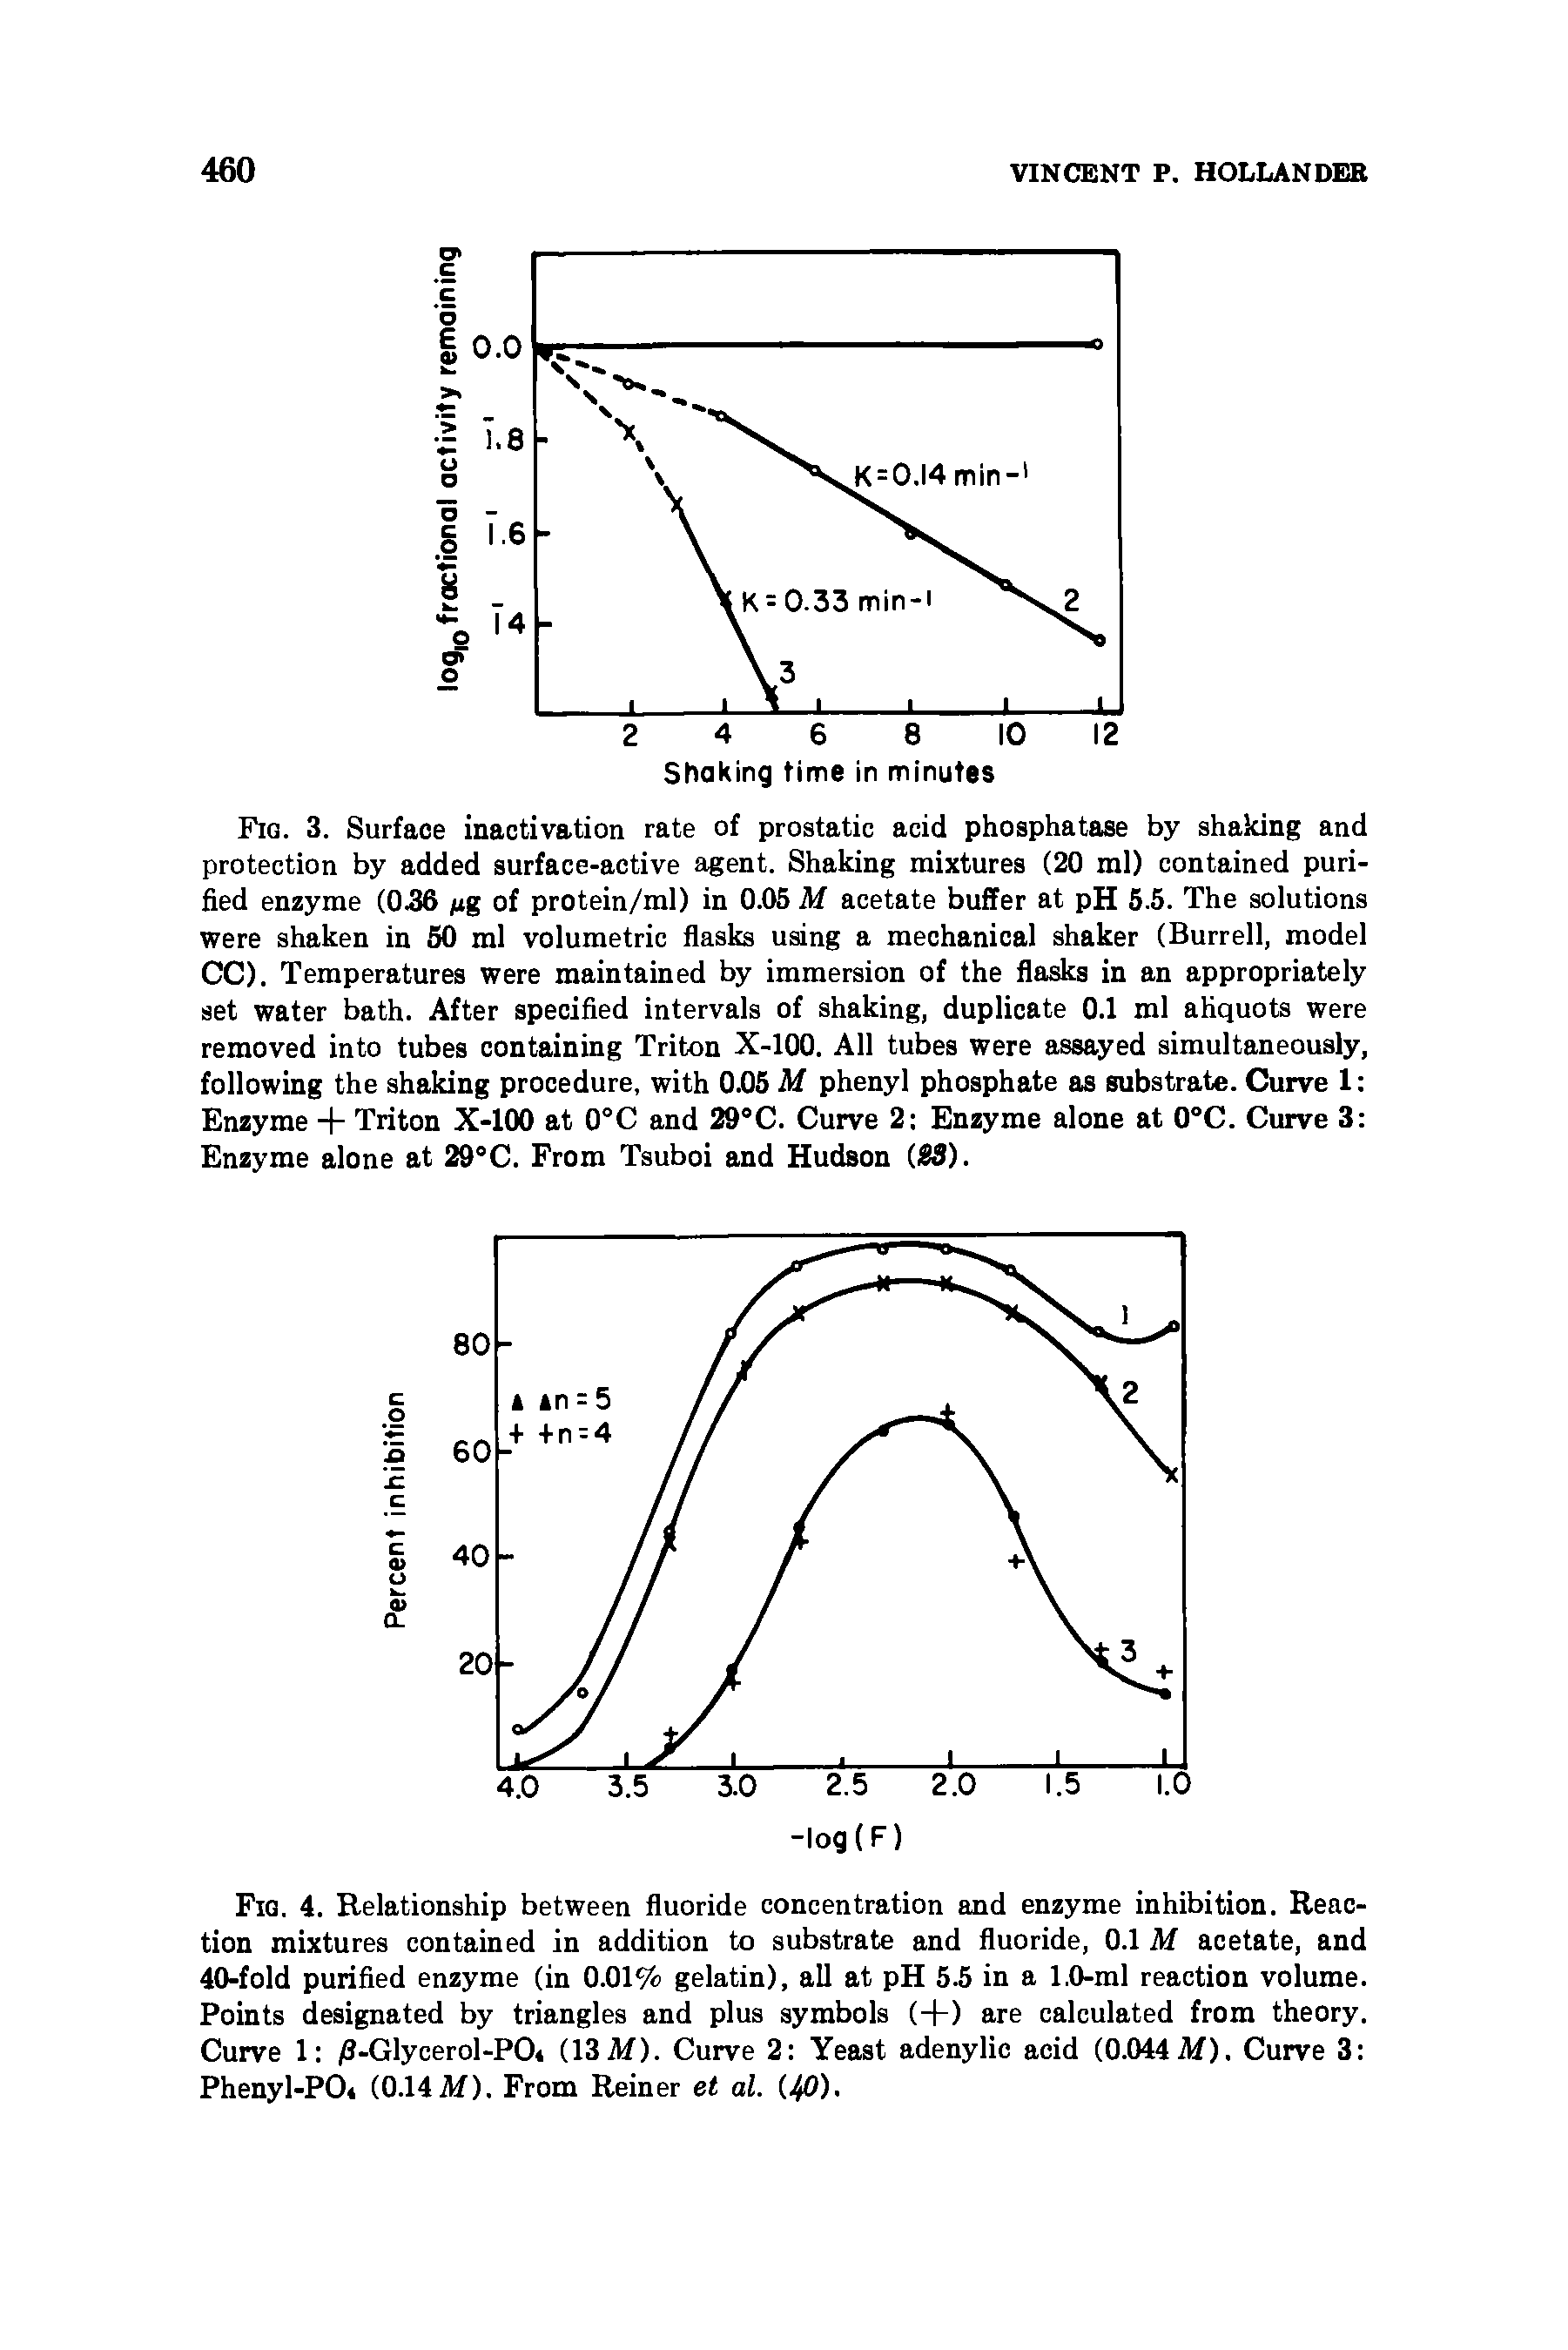 Fig. 4. Relationship between fluoride concentration and enzyme inhibition. Reaction mixtures contained in addition to substrate and fluoride, 0.1 M acetate, and 40-fold purified enzyme (in 0.01% gelatin), all at pH 5.5 in a 1.0-ml reaction volume. Points designated by triangles and plus symbols (+) are calculated from theory. Curve 1 /3-Glycerol-PO (13M). Curve 2 Yeast adenylic acid (0.044M). Curve 3 Phenyl-PO (0.14 M). From Reiner et al. (40).